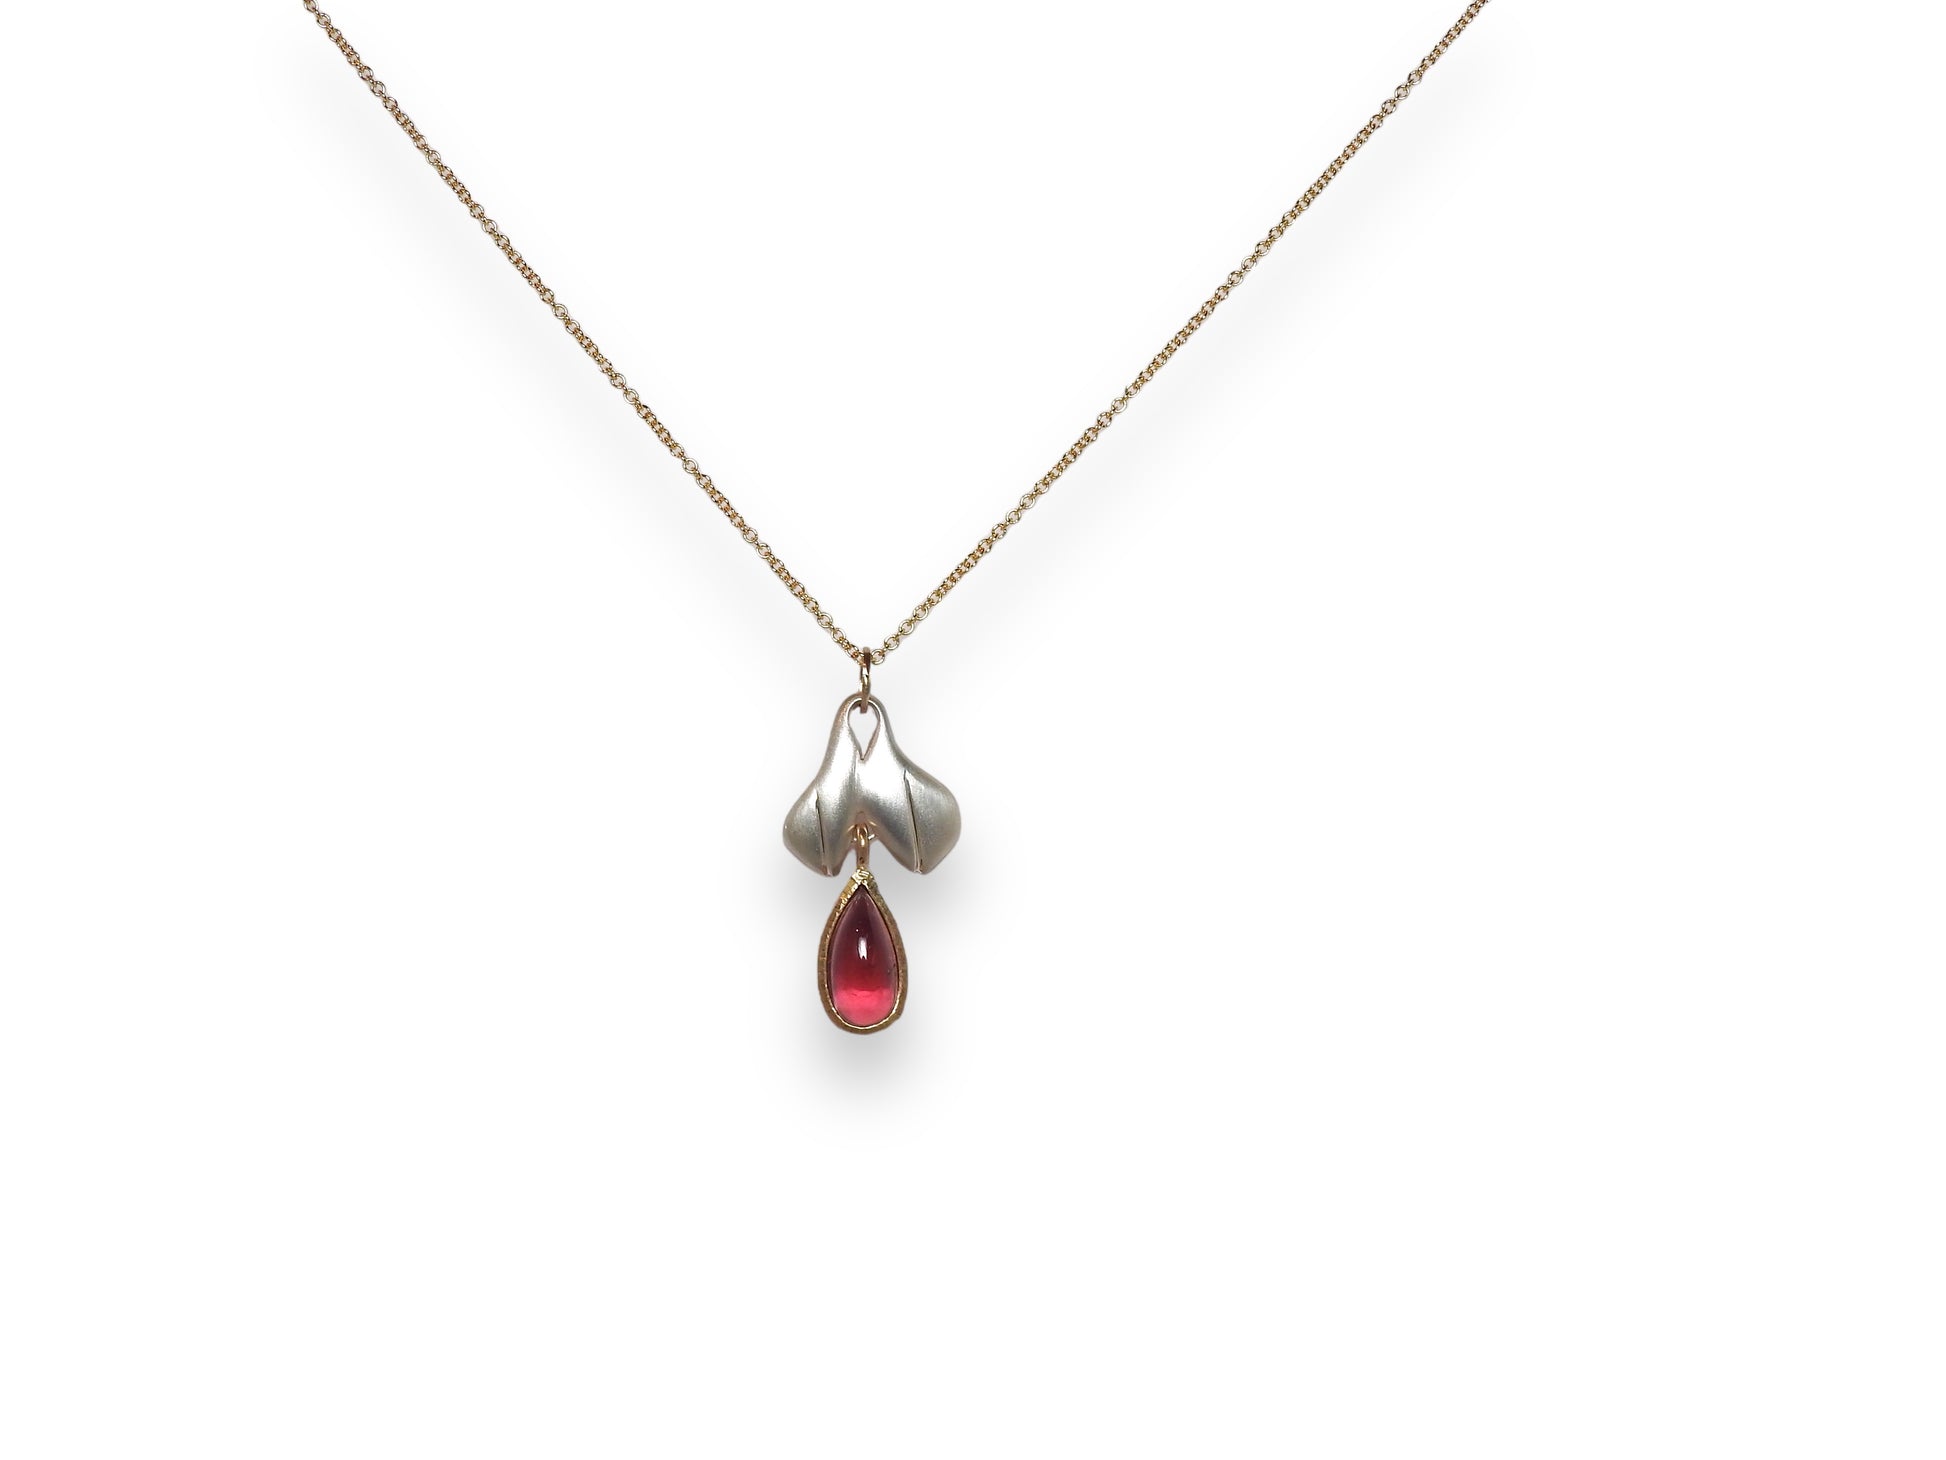 Tourmaline drop cab stone pendant in yellow gold and sterling silver, by ZEALmetal, Nicole Horlor, in Kingston, ON, Canada